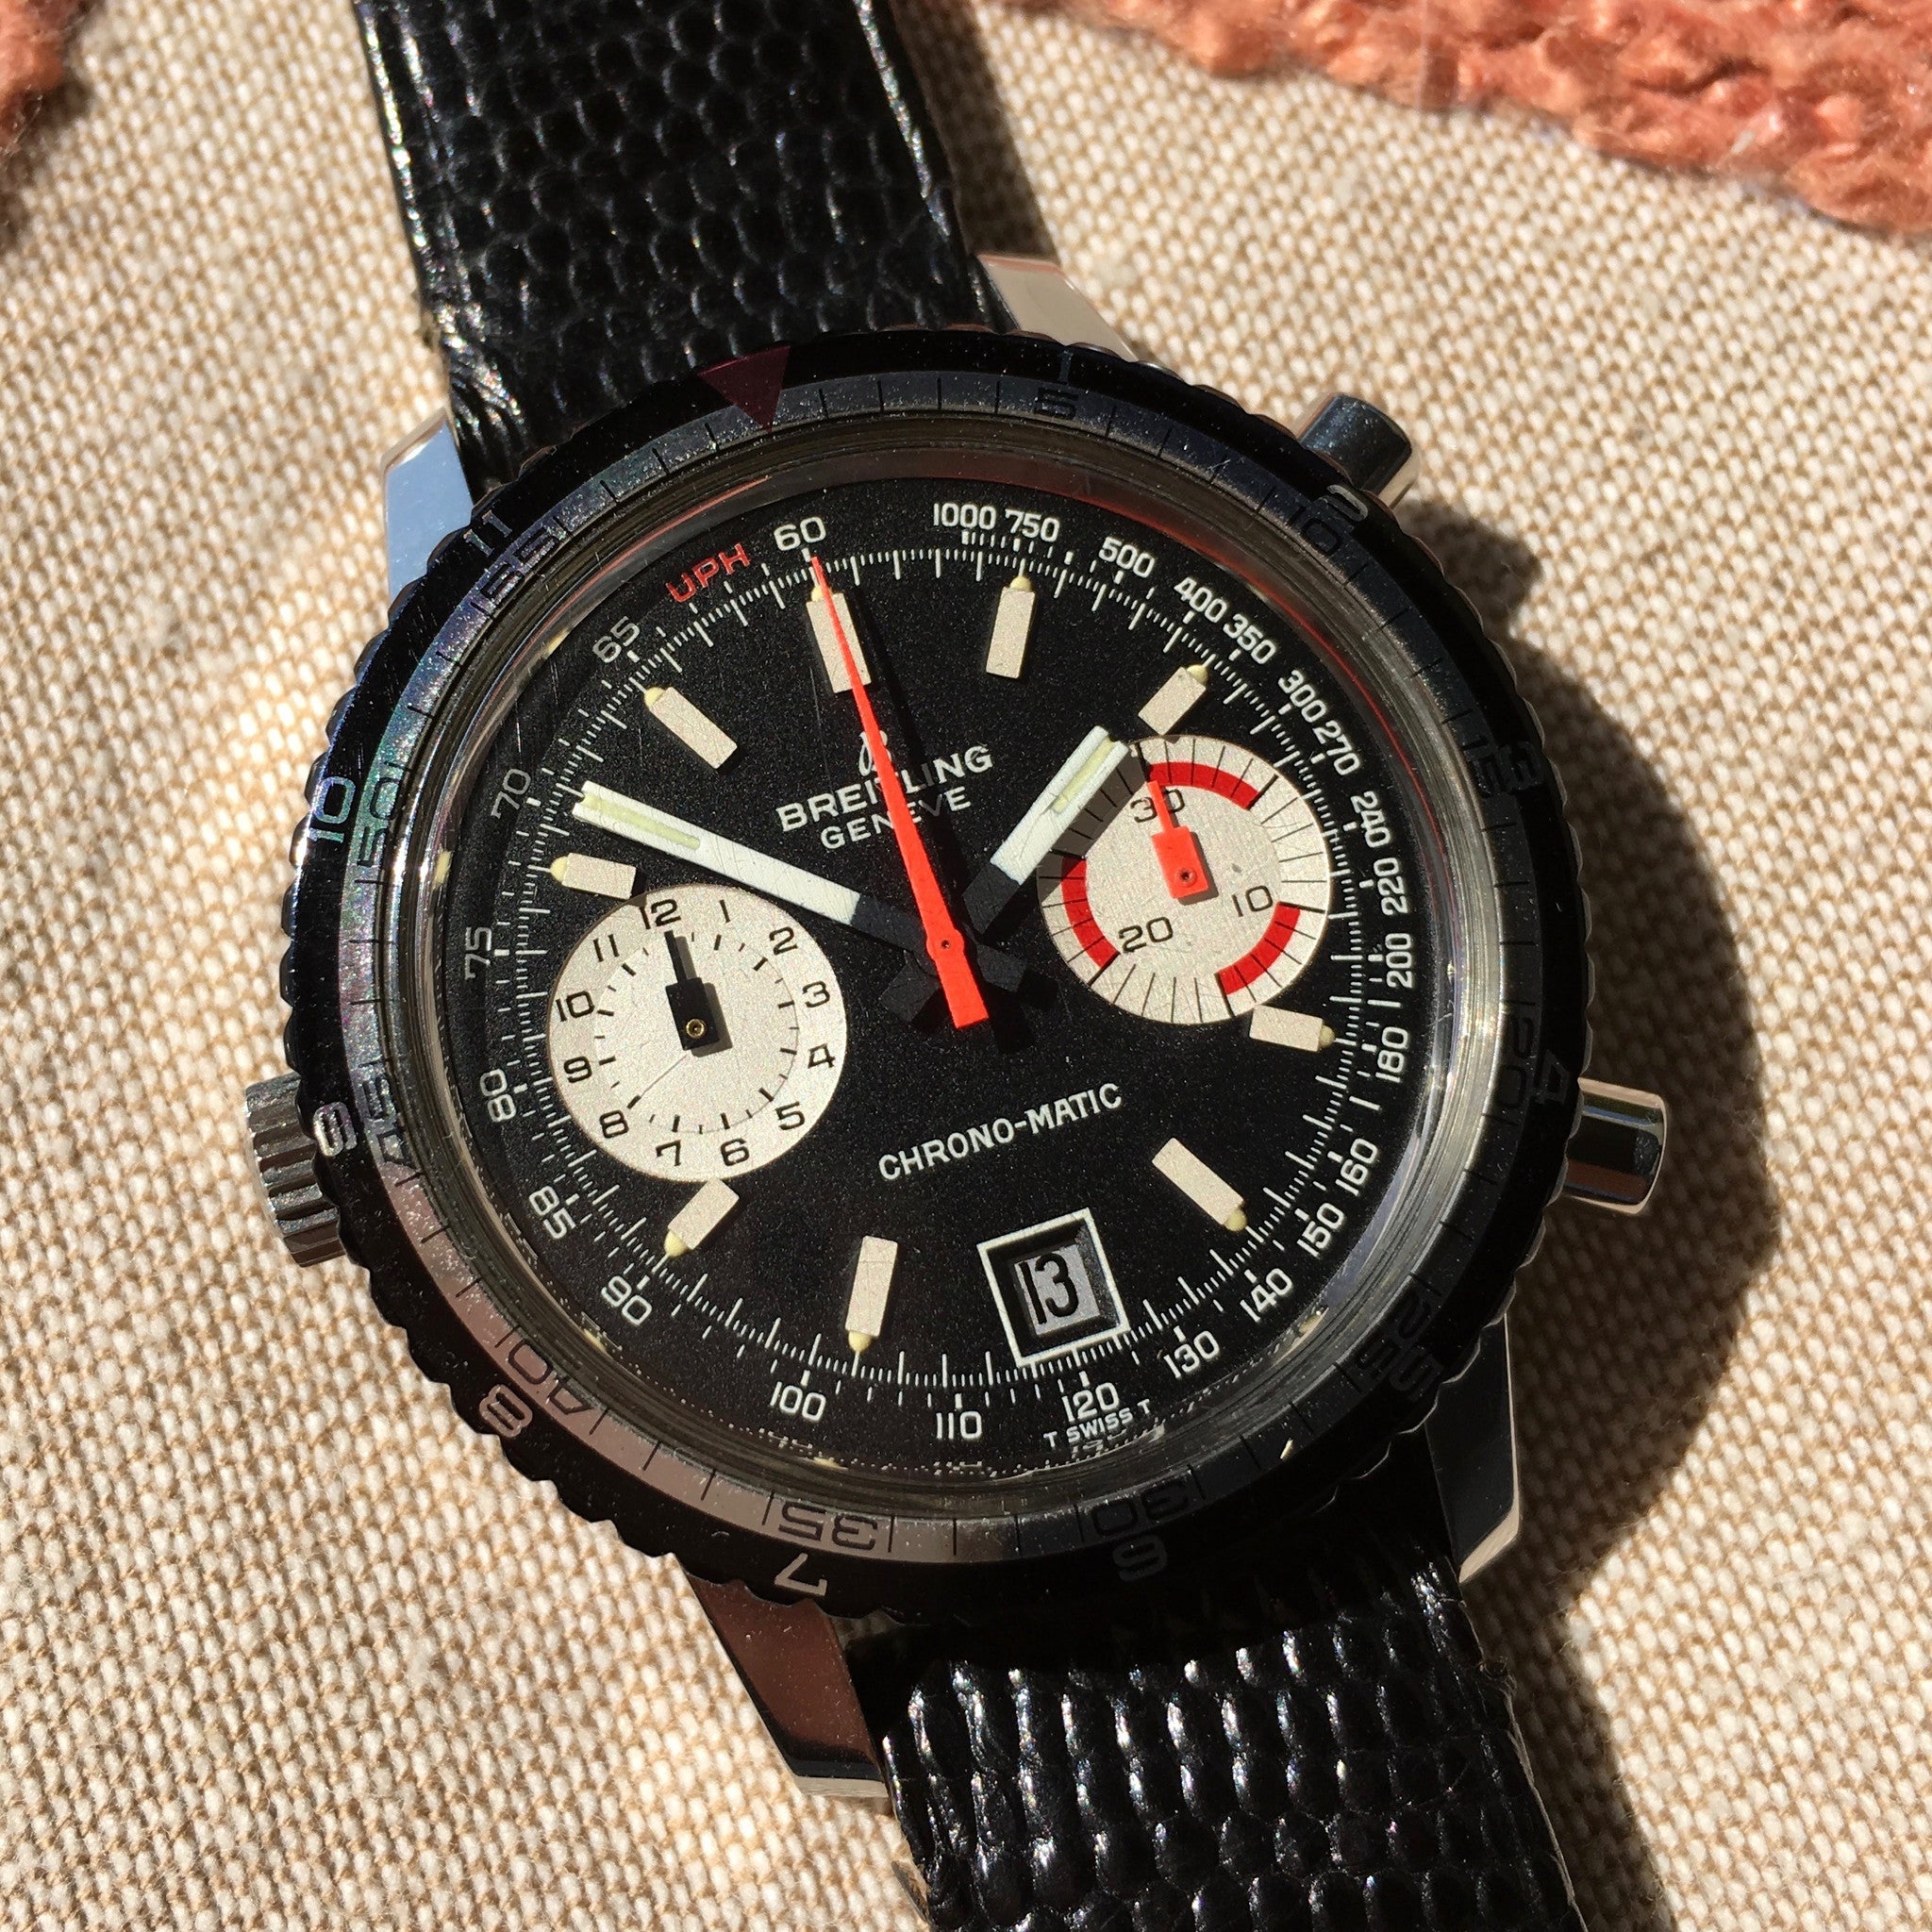 Vintage Breitling Chrono Matic 2110 Steel Cal. 11 Automatic Steel Watch ...